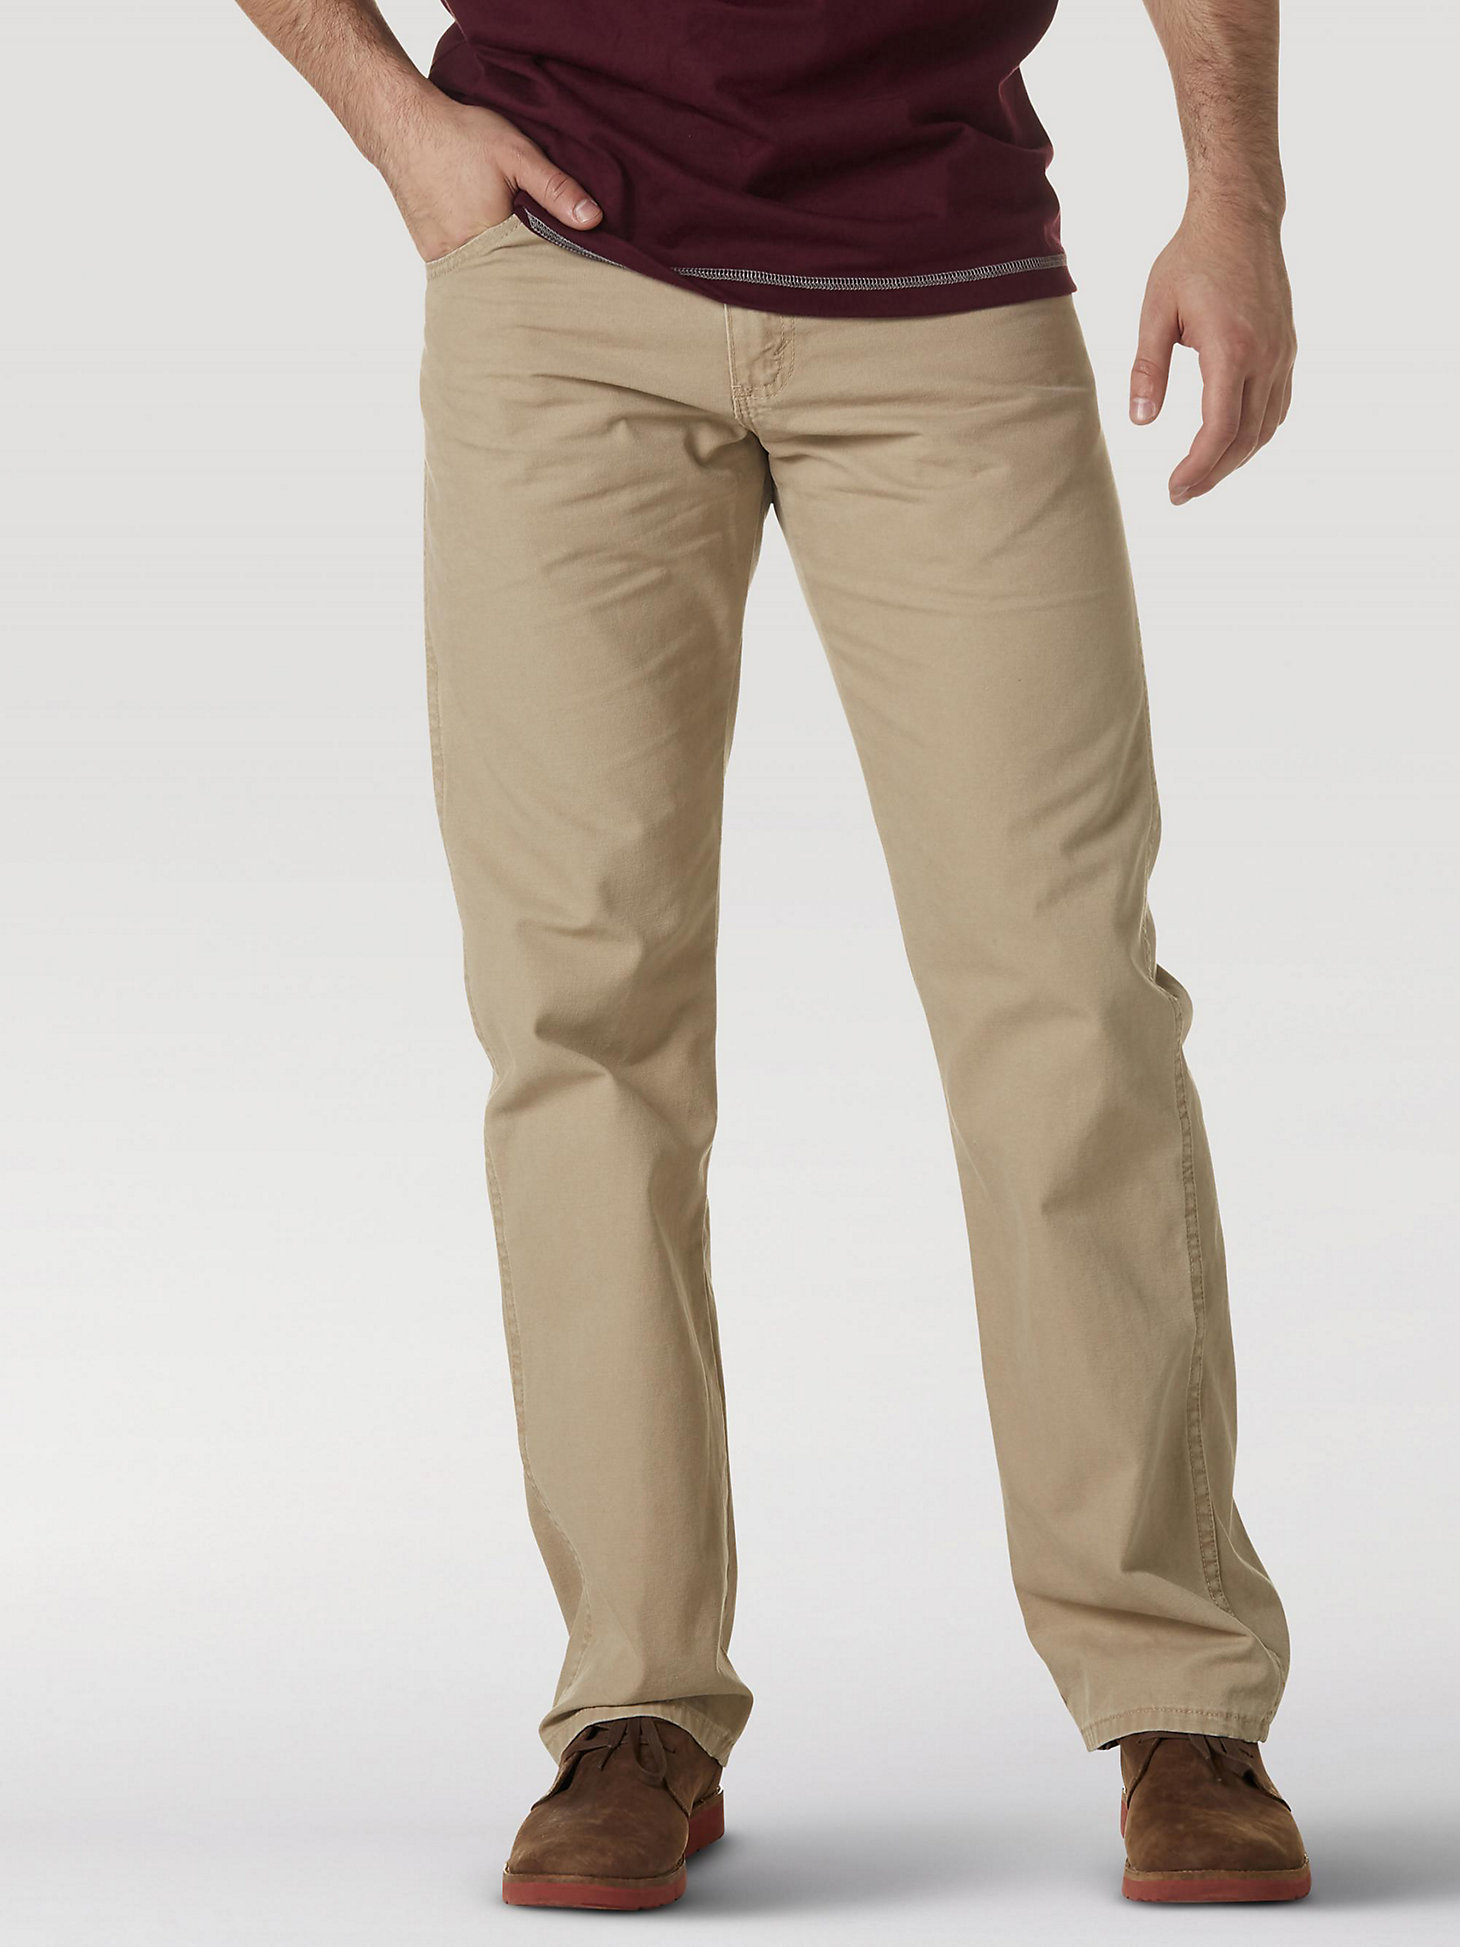 Wrangler Rugged Wear® Relaxed Fit Mid Rise Jean in Golden Khaki main view